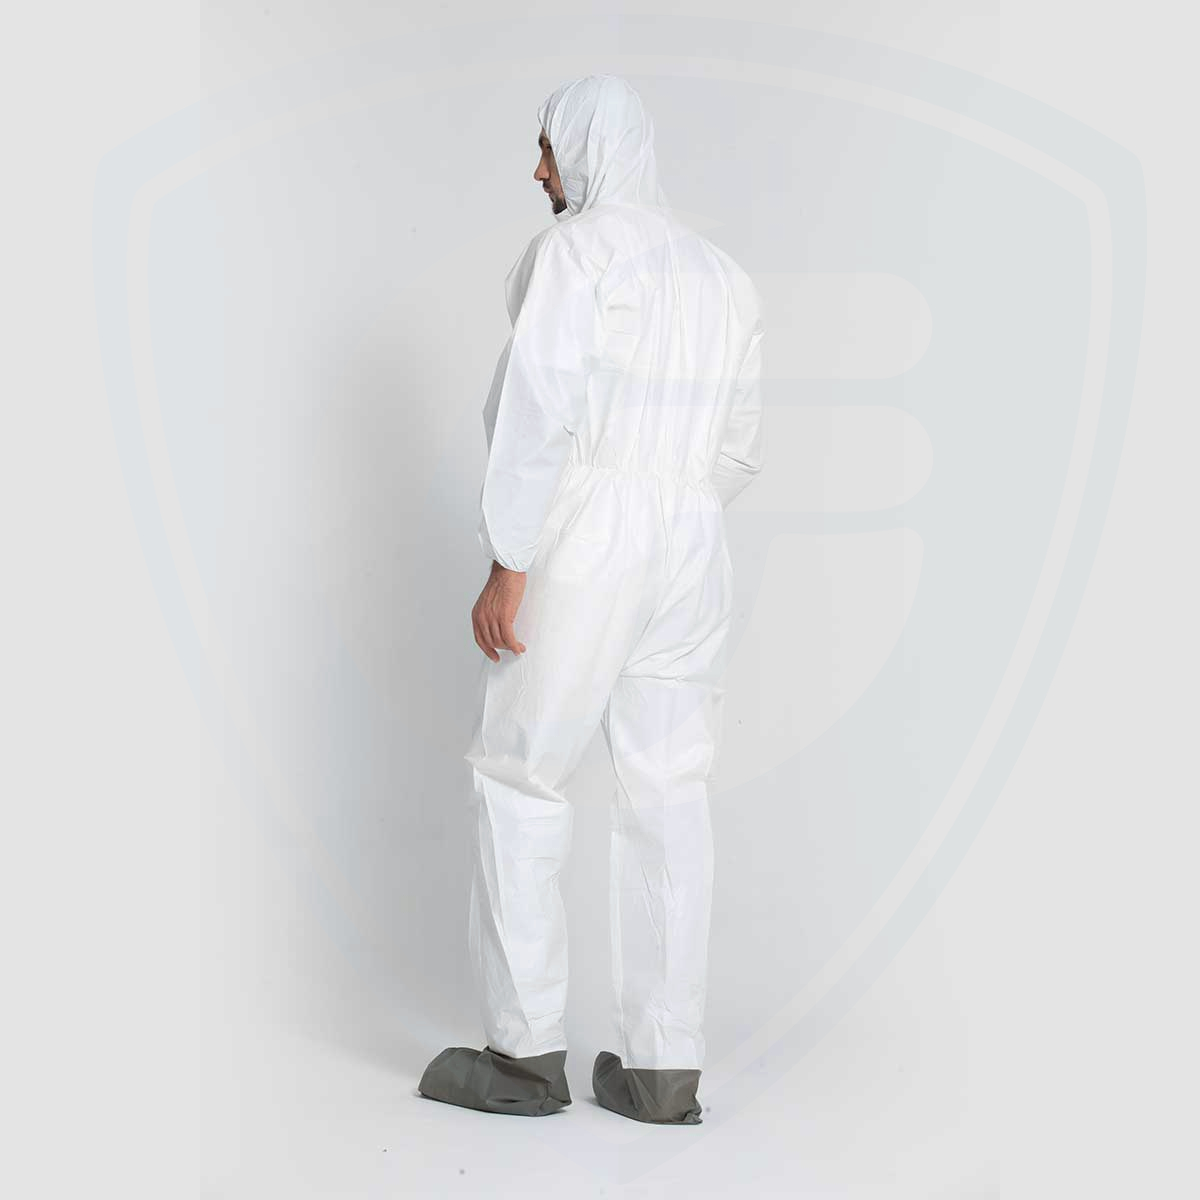 FC2050-1 Cat.III EN1073 EN1149 Anti-static Protective Clothing with Gray Boots 